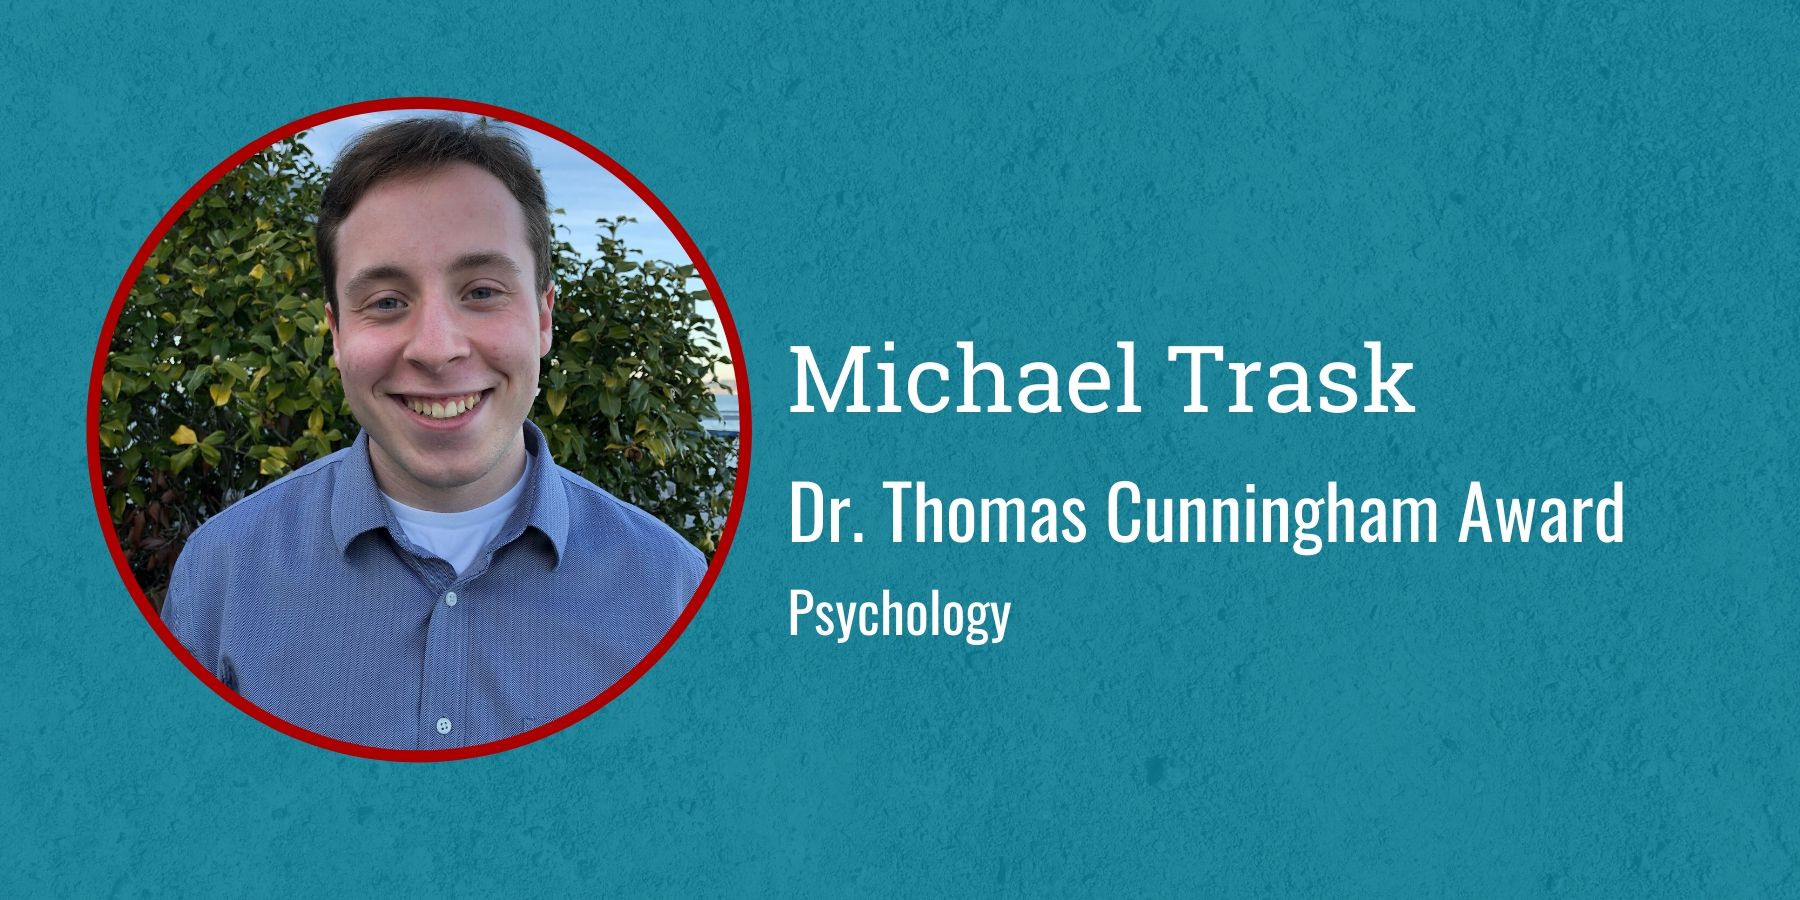 Photo of Michael Trask and text Dr. Thomas Cunningham award, Psychology